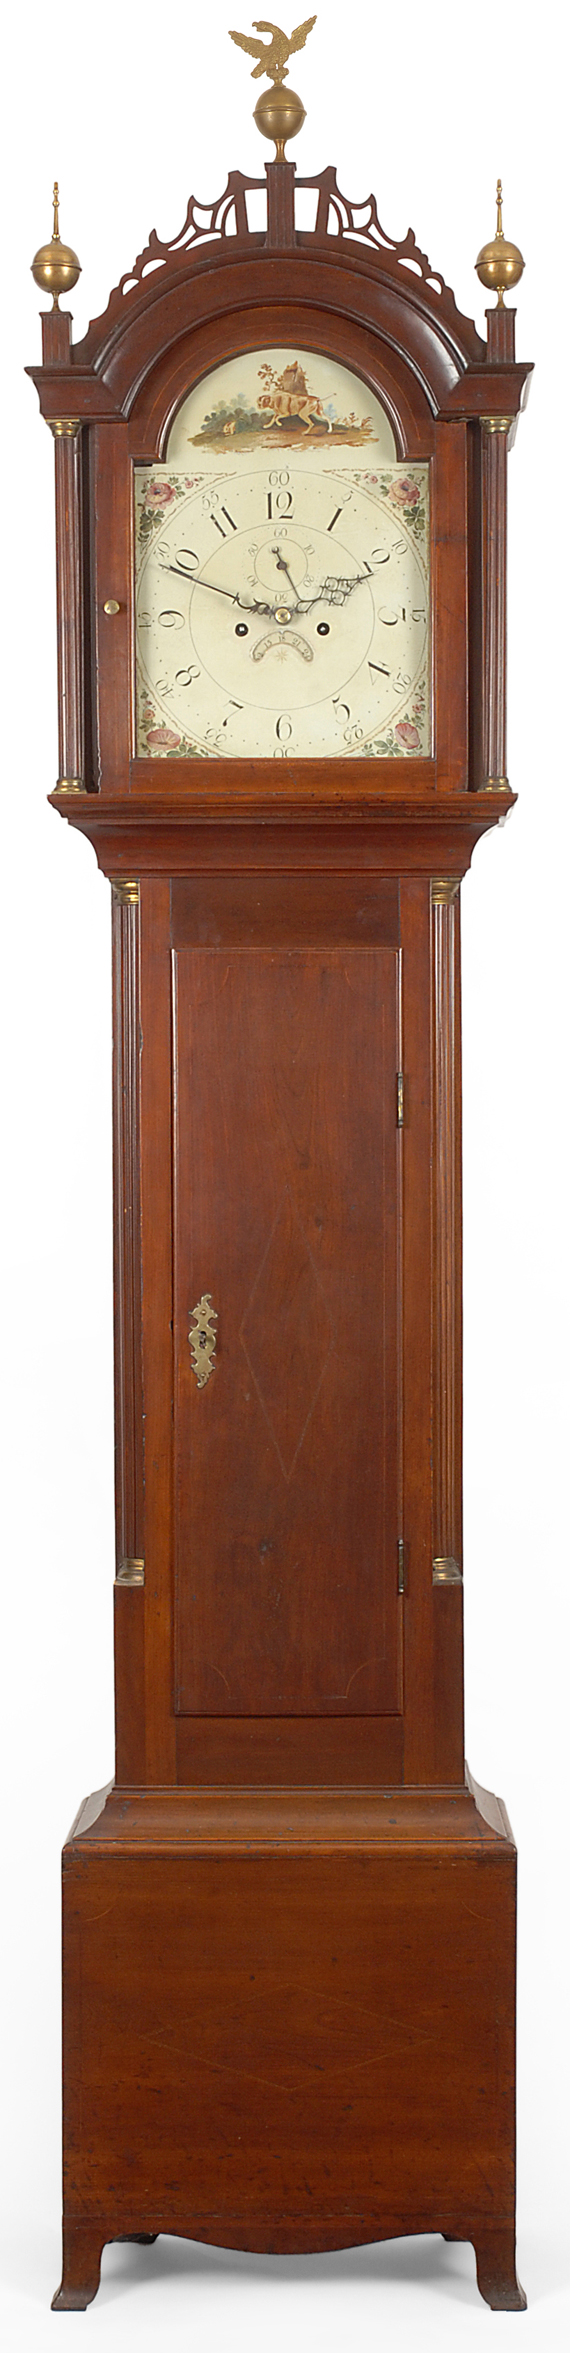 A wonderful cherry wood Hepplewhite tall case clock, signed by the case maker 